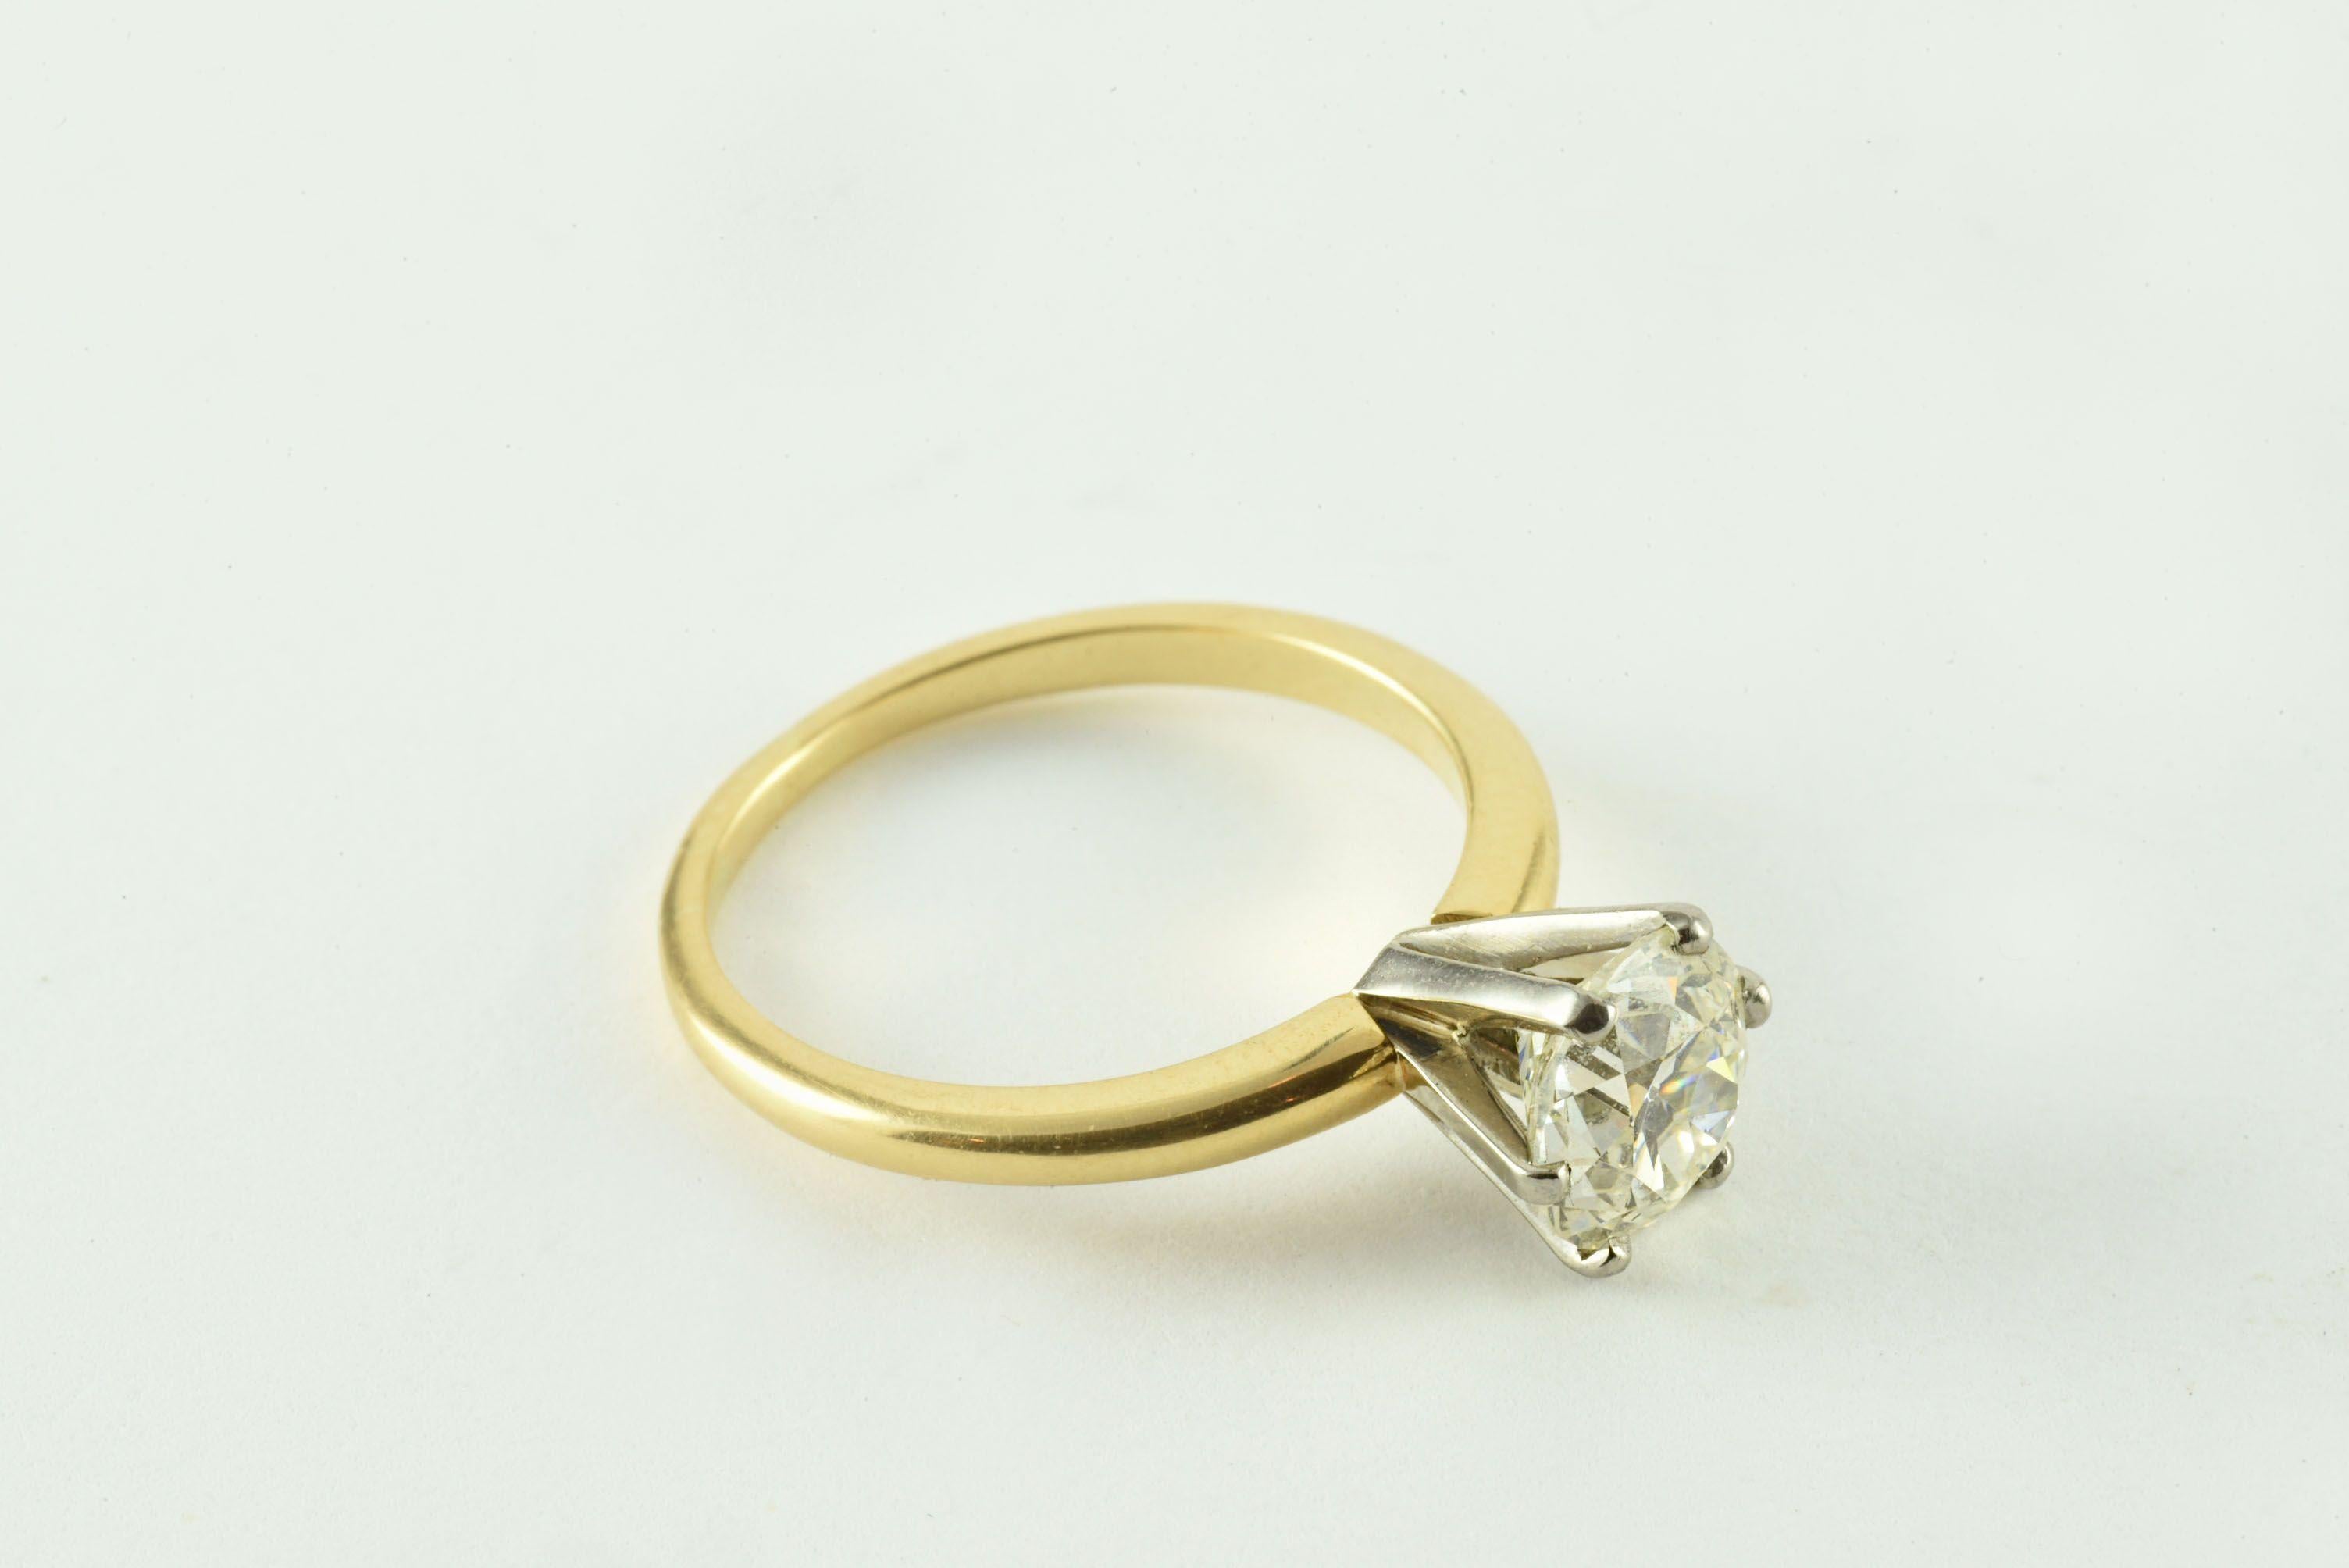 Antique 1.40 Carat Solitaire Diamond Engagement Ring In Good Condition For Sale In Denver, CO